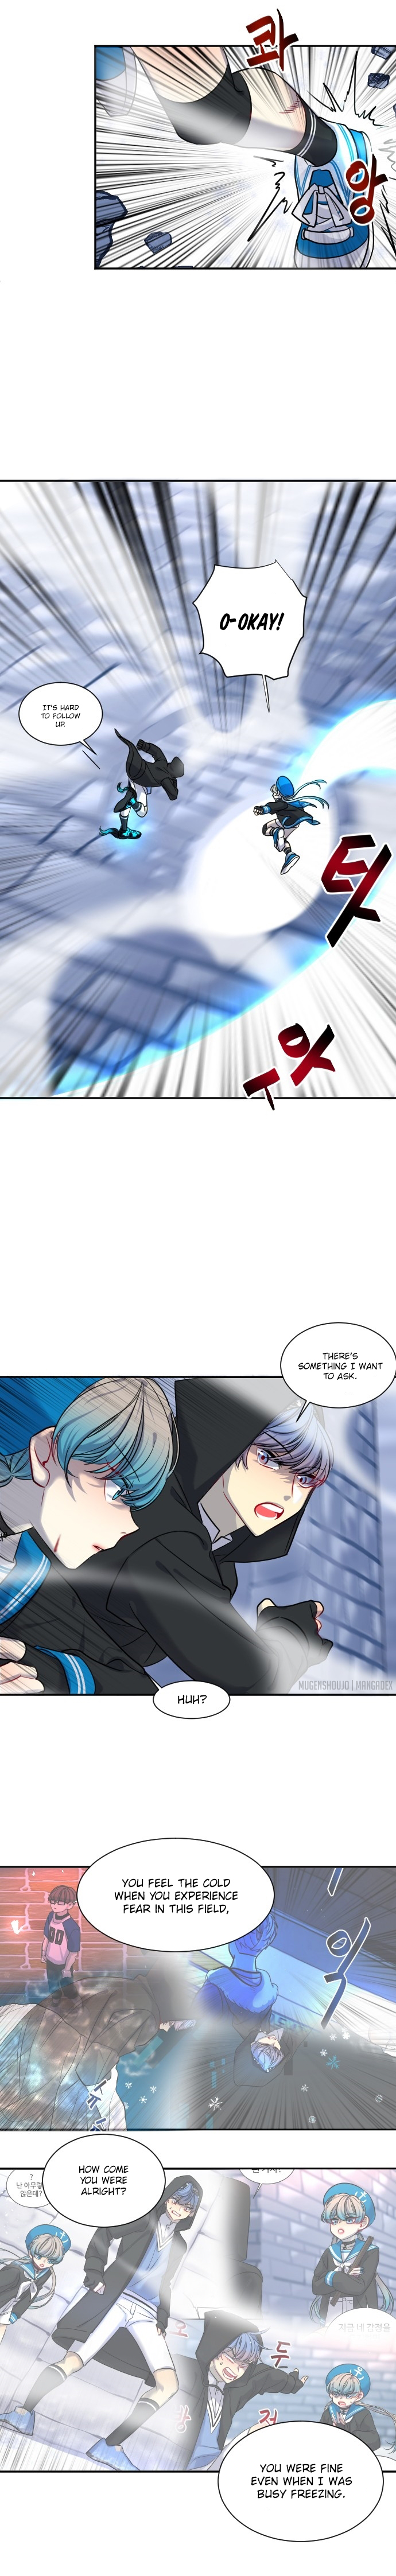 Doll Change Ch. 25 Chase